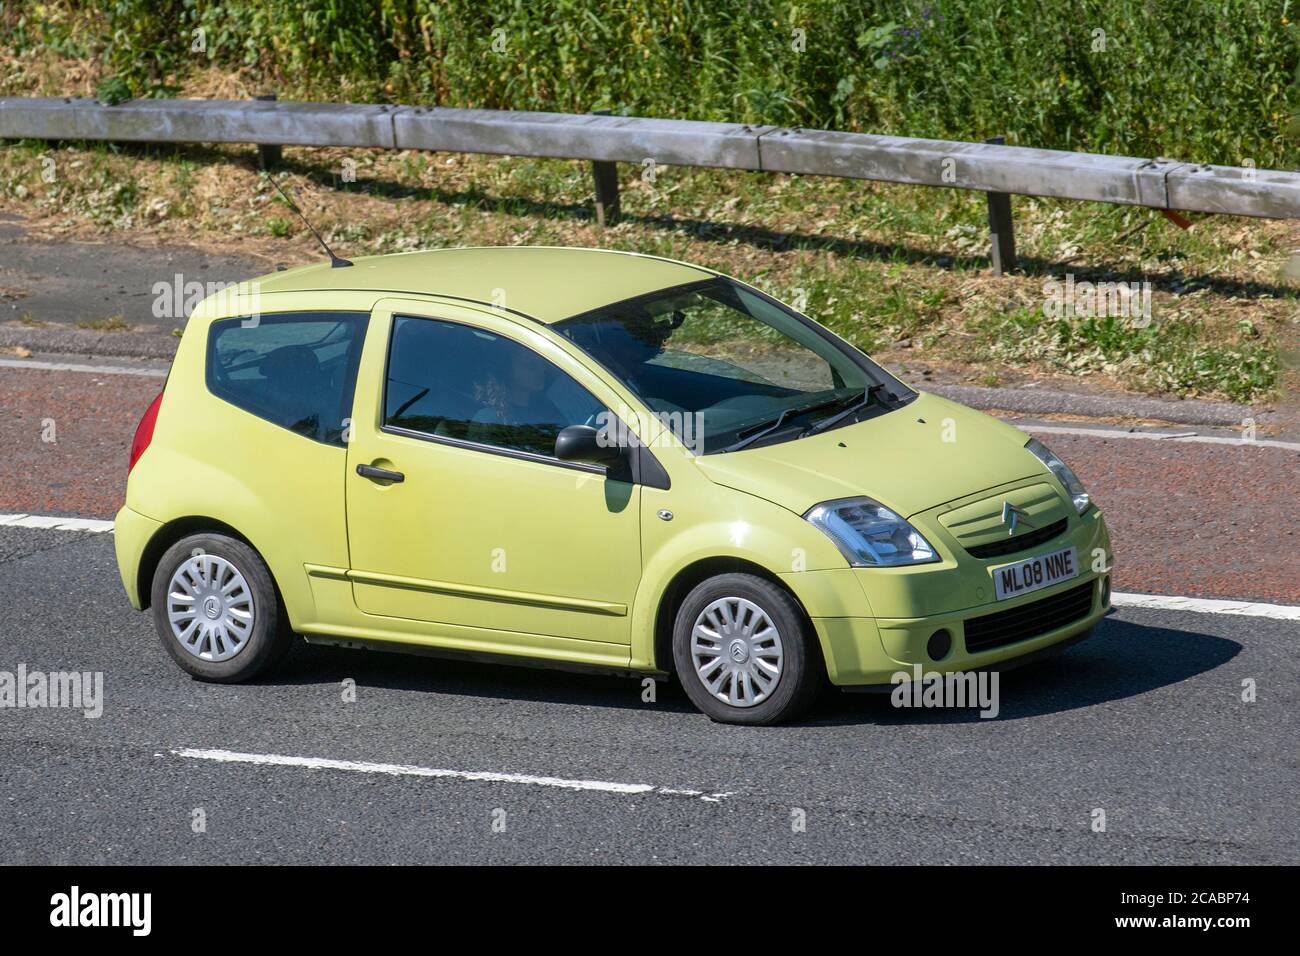 2008 yellow Citroën C2 Cool 2dr small city car; Vehicular traffic moving vehicles, cars driving vehicle on UK roads, motors, motoring on the M6 motorway highway network. Stock Photo